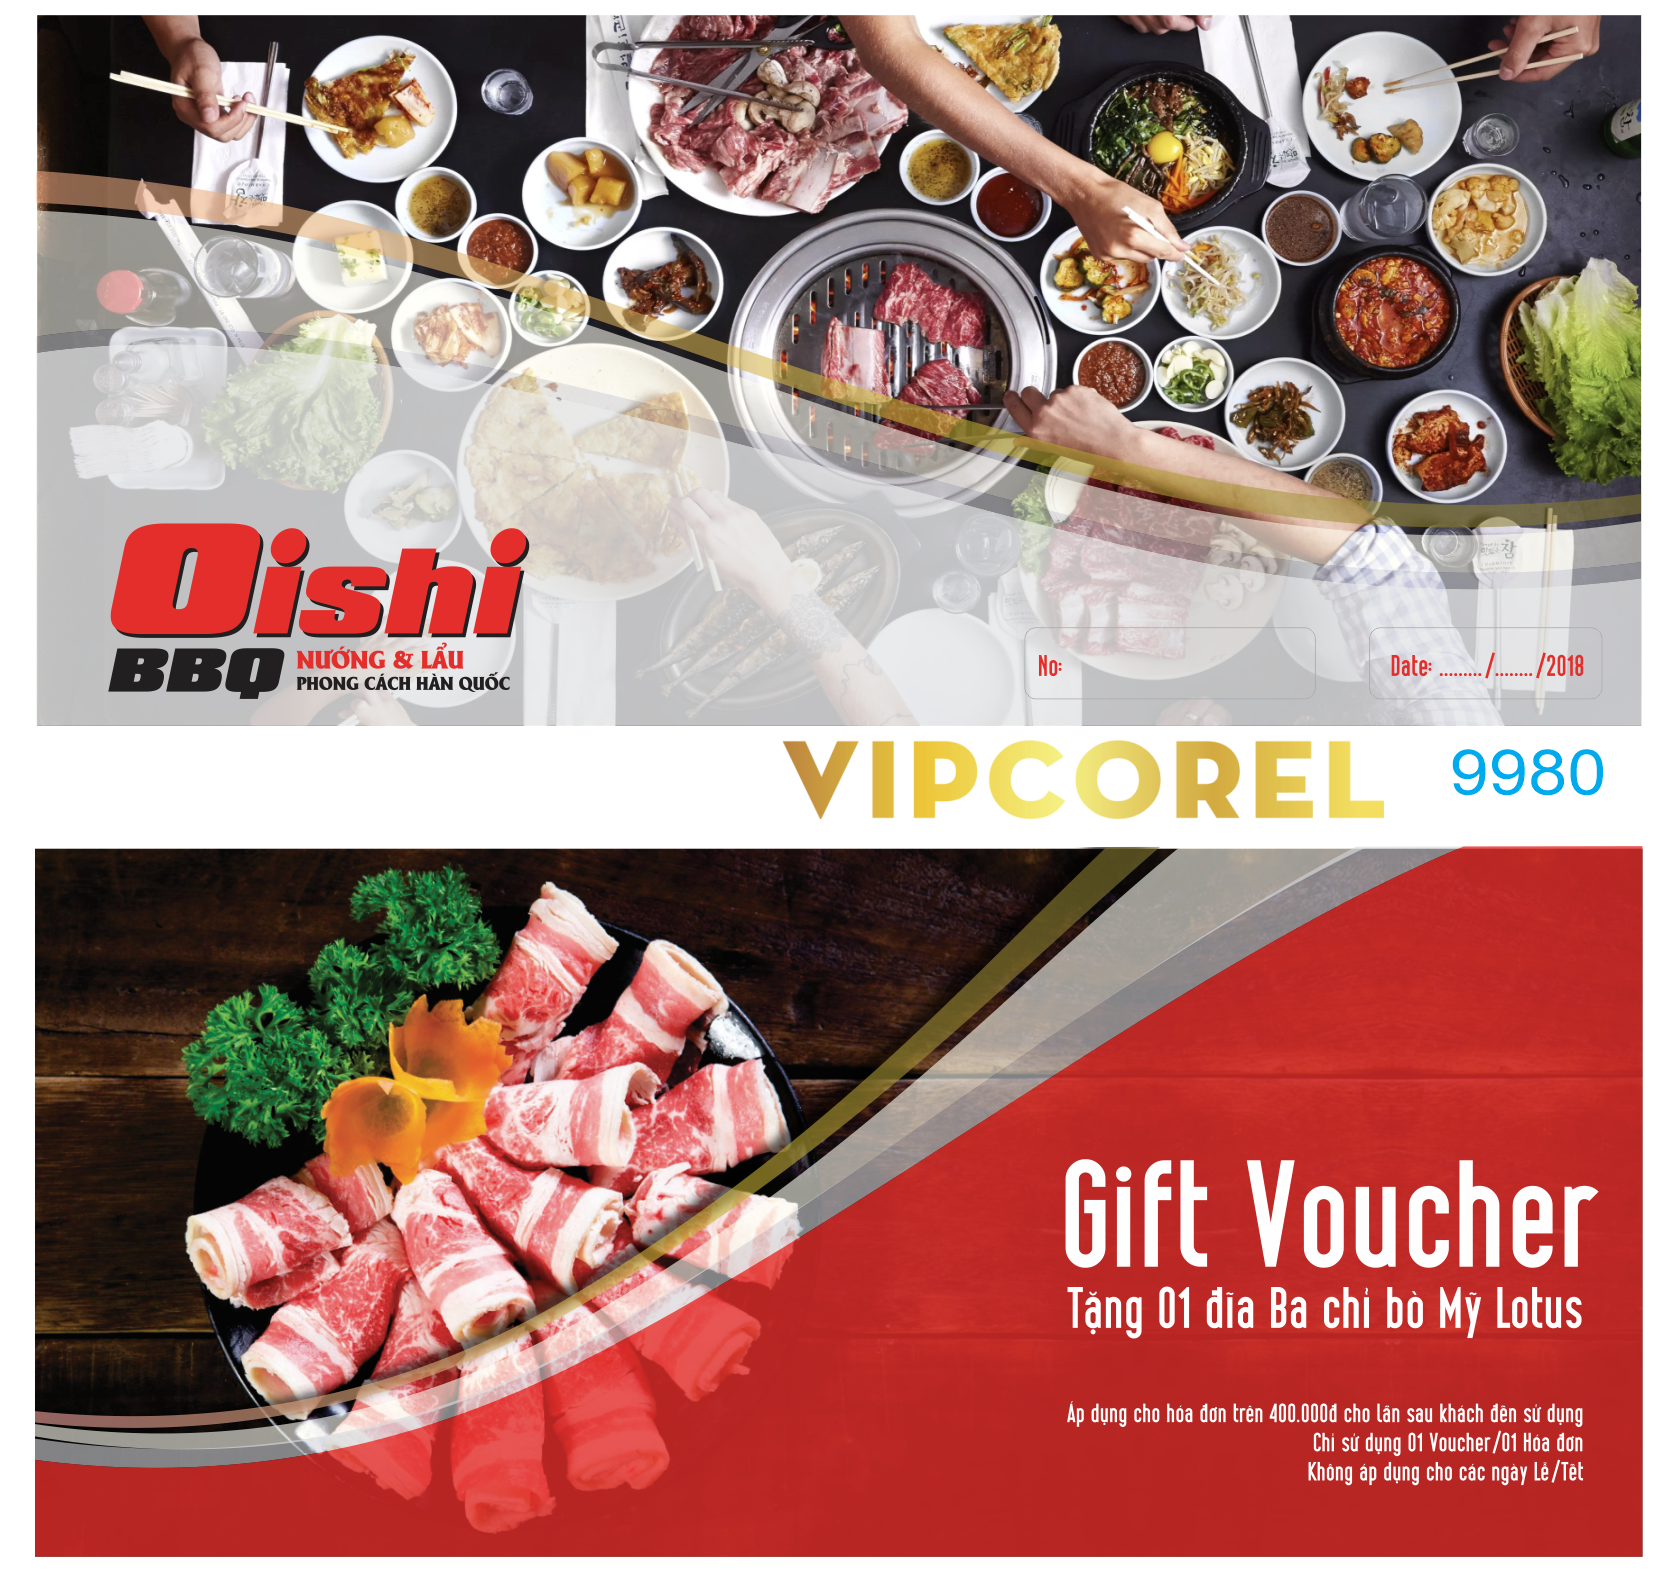 gift voucher bbq nuong lau oishi - phong cach han quoc.png